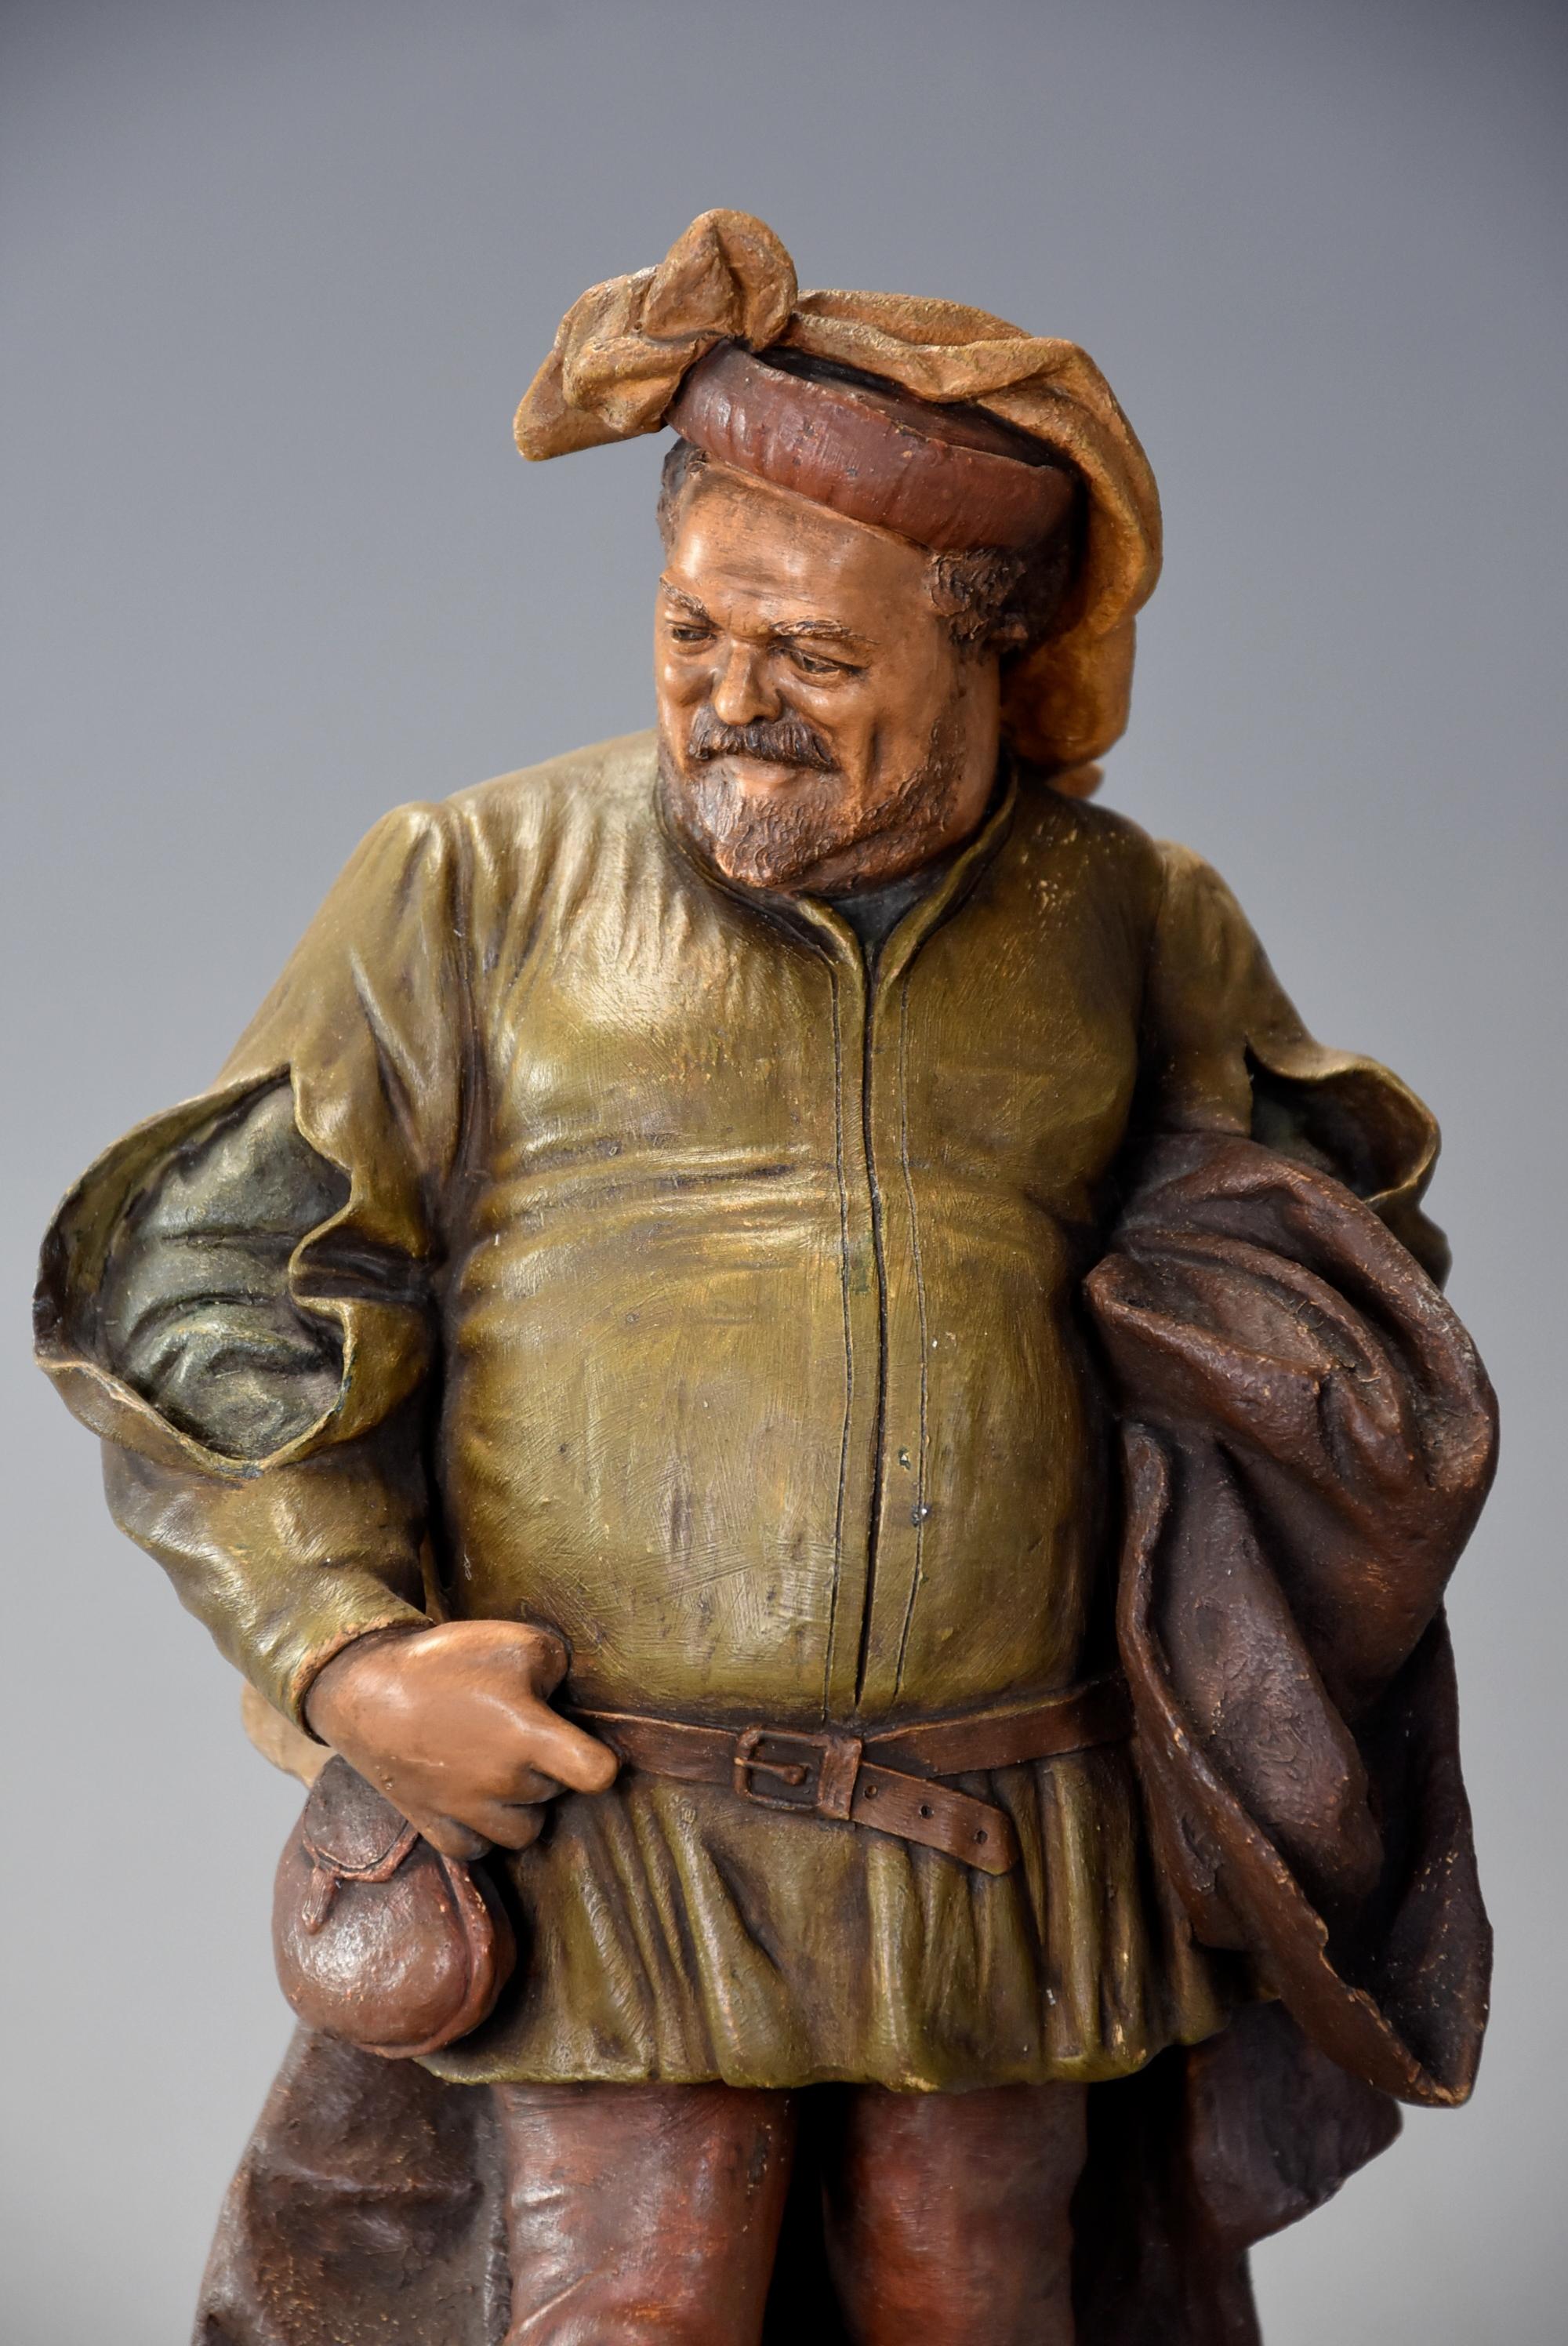 A late 19th century terracotta figure of ‘Falstaff’ by Friedrich Goldscheider.

This nicely cast figure depicts Sir John Falstaff, the portly fictional comic character created by William Shakespeare, in traditional dress, with makers mark to the